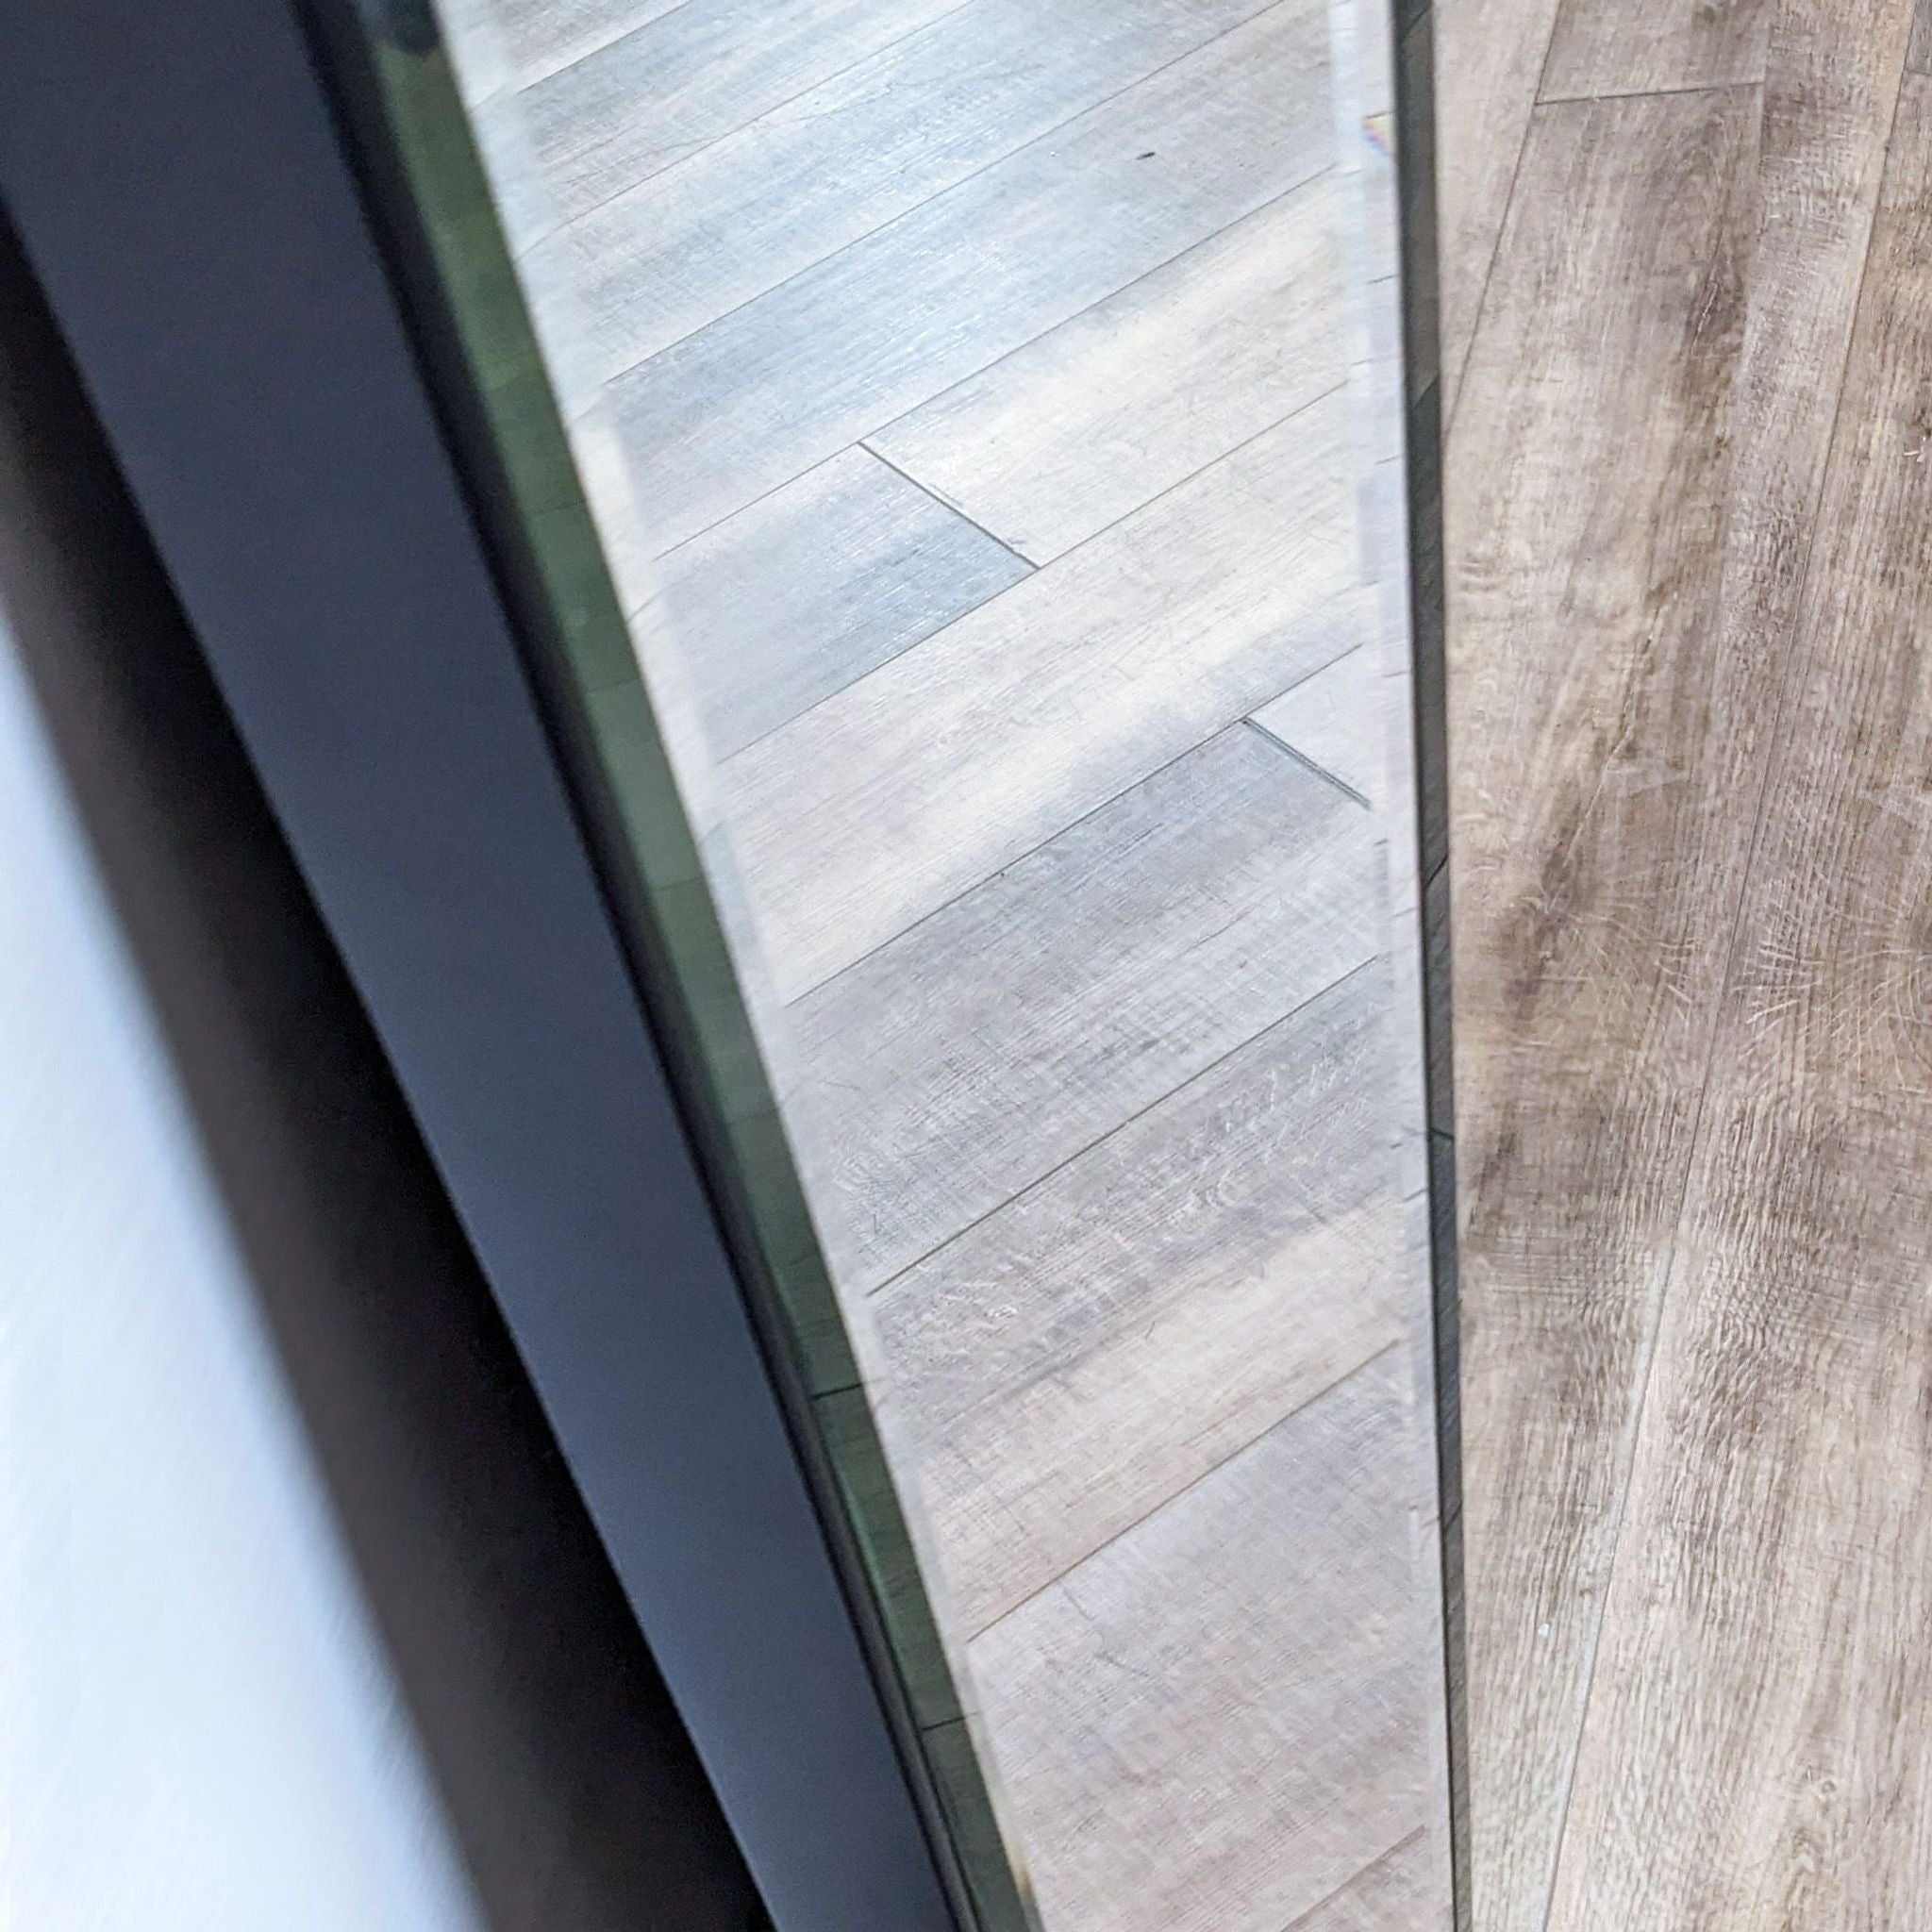 Alt text 2: Close-up of Williams Sonoma Home mirror's beveled edge detail and wooden flooring reflected in its surface.